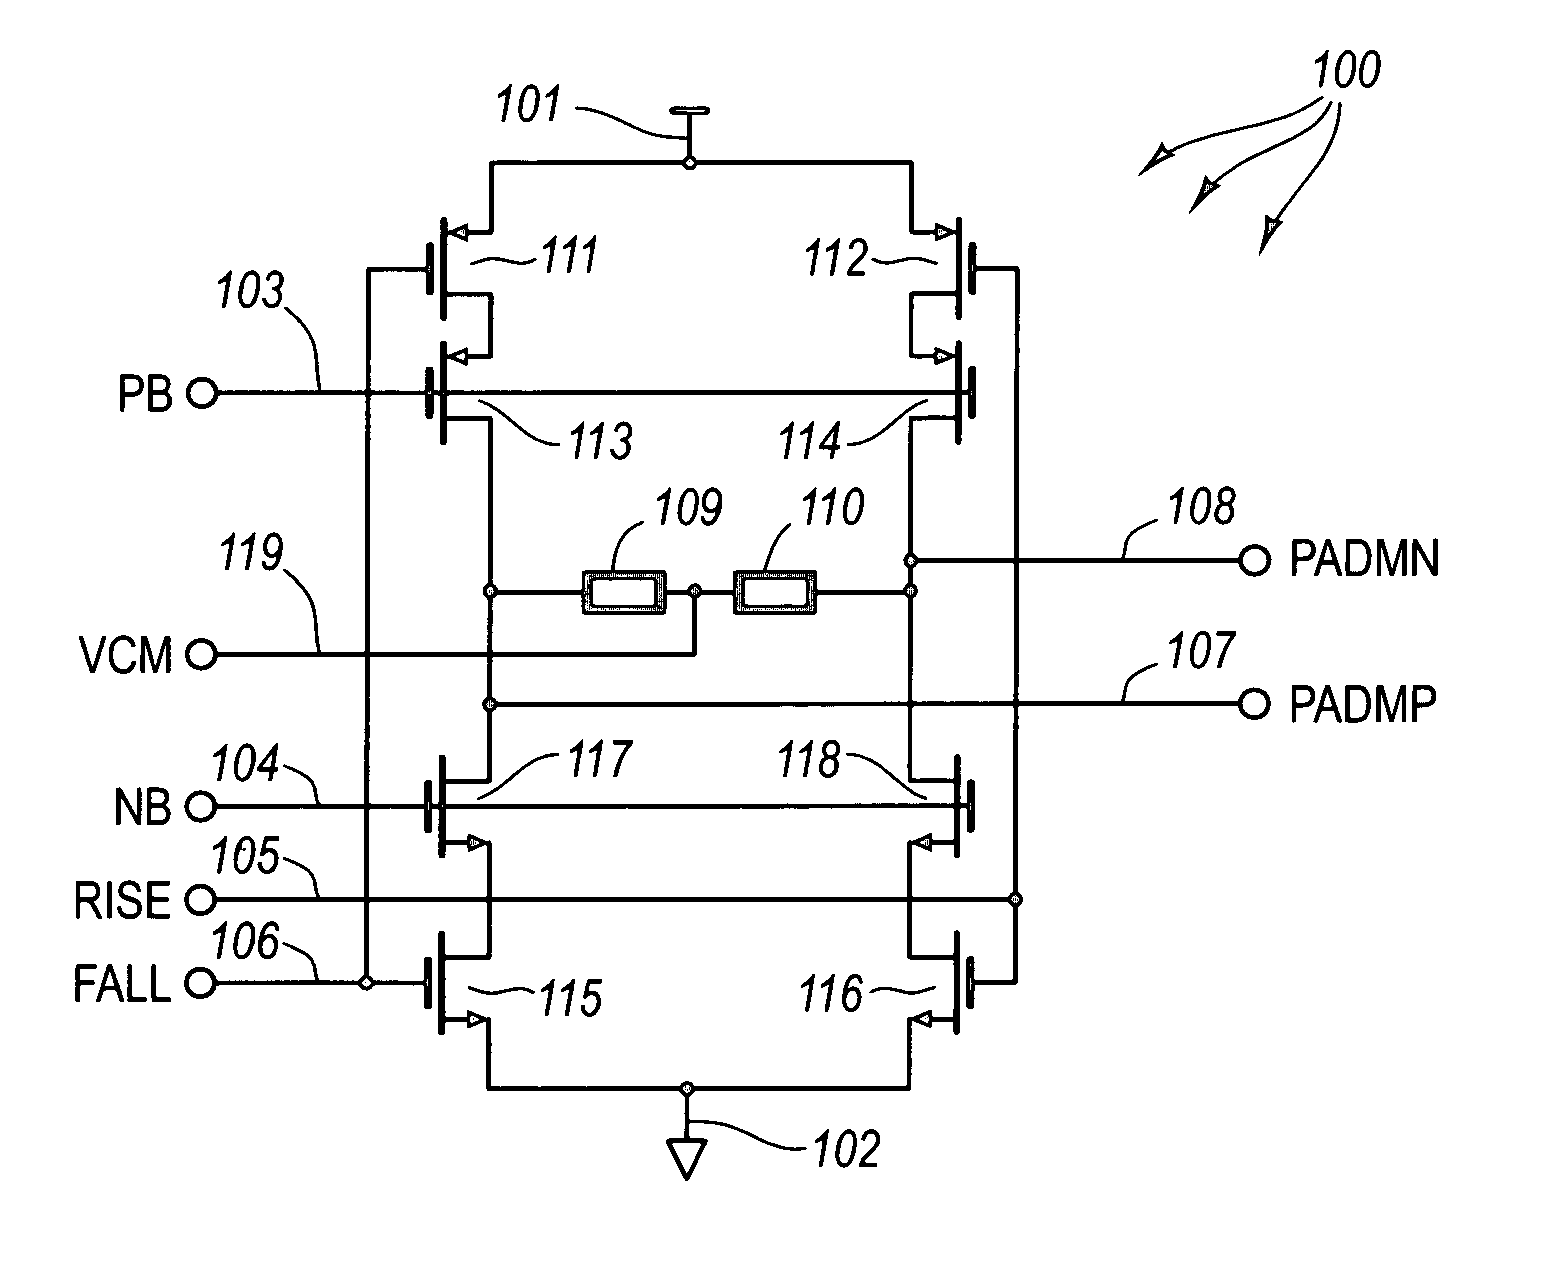 Low-voltage differential signal (LVDS) transmitter with high signal integrity